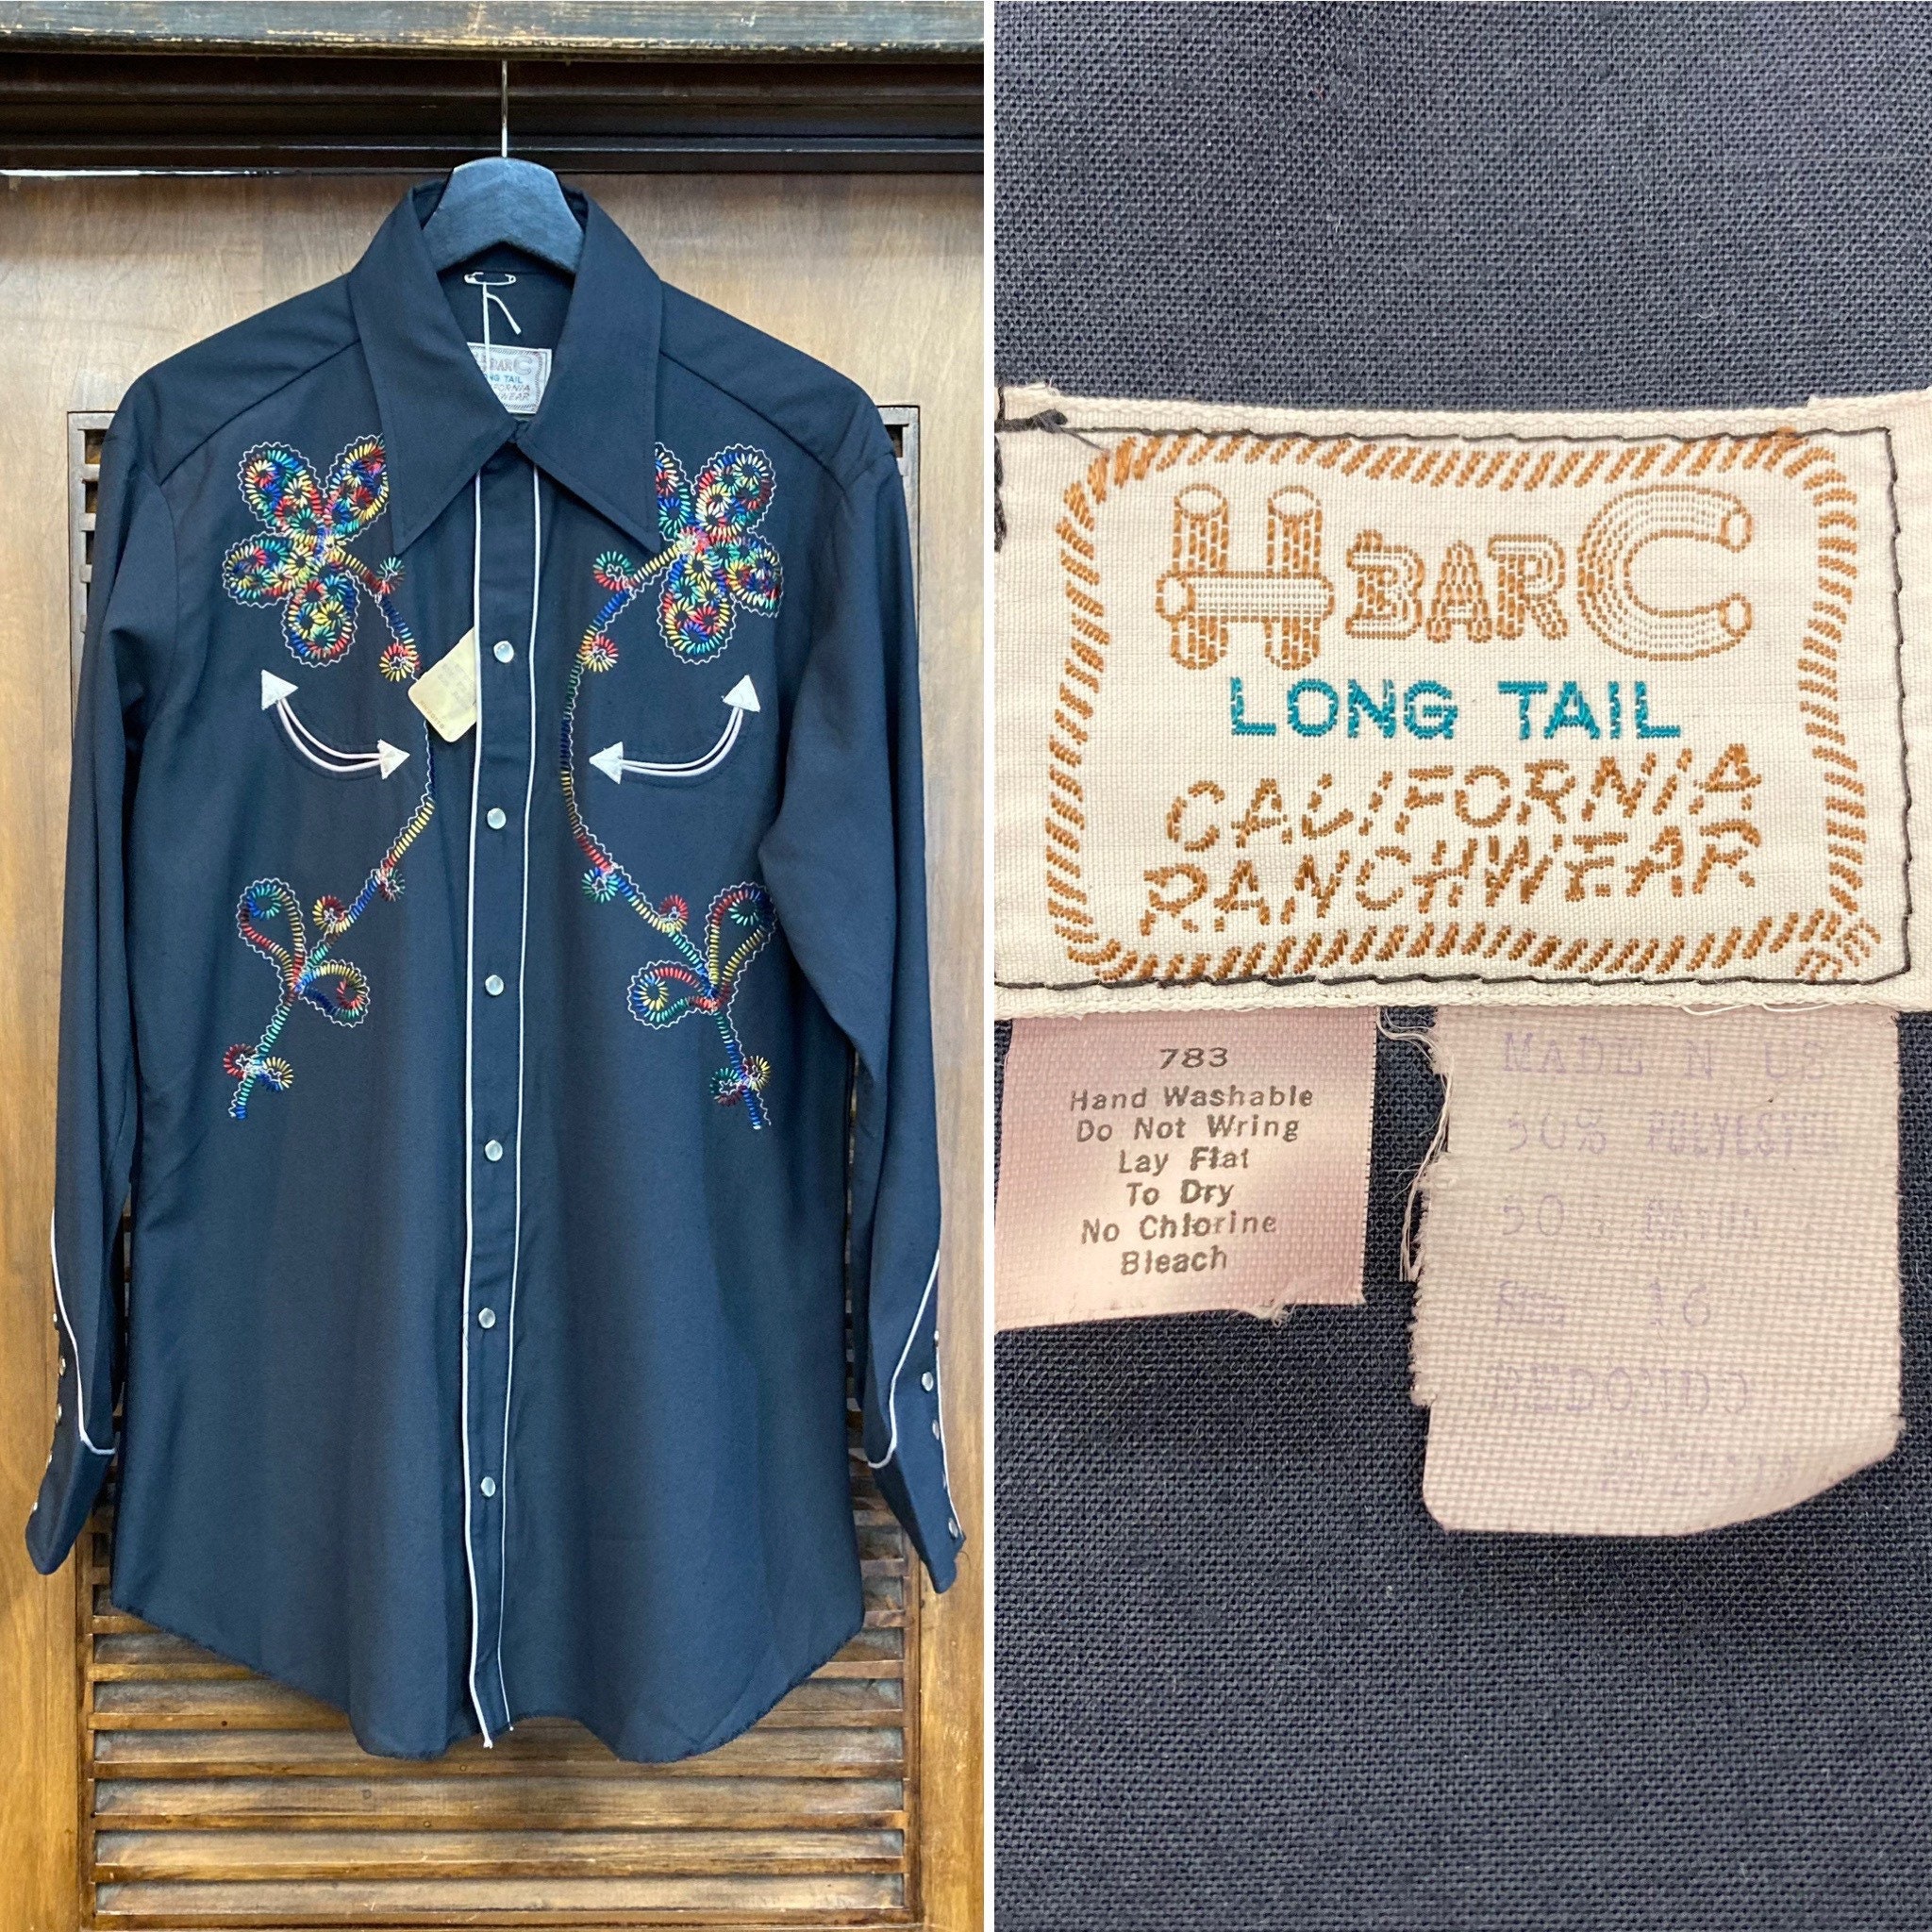 Embroidered see measurements California Ranchwear Vintage Western Men's Cowboy & Rodeo Shirt Large Tag Size 16.5-33 H Bar C Kleding Herenkleding Overhemden & T-shirts Oxfords & Buttondowns approx 